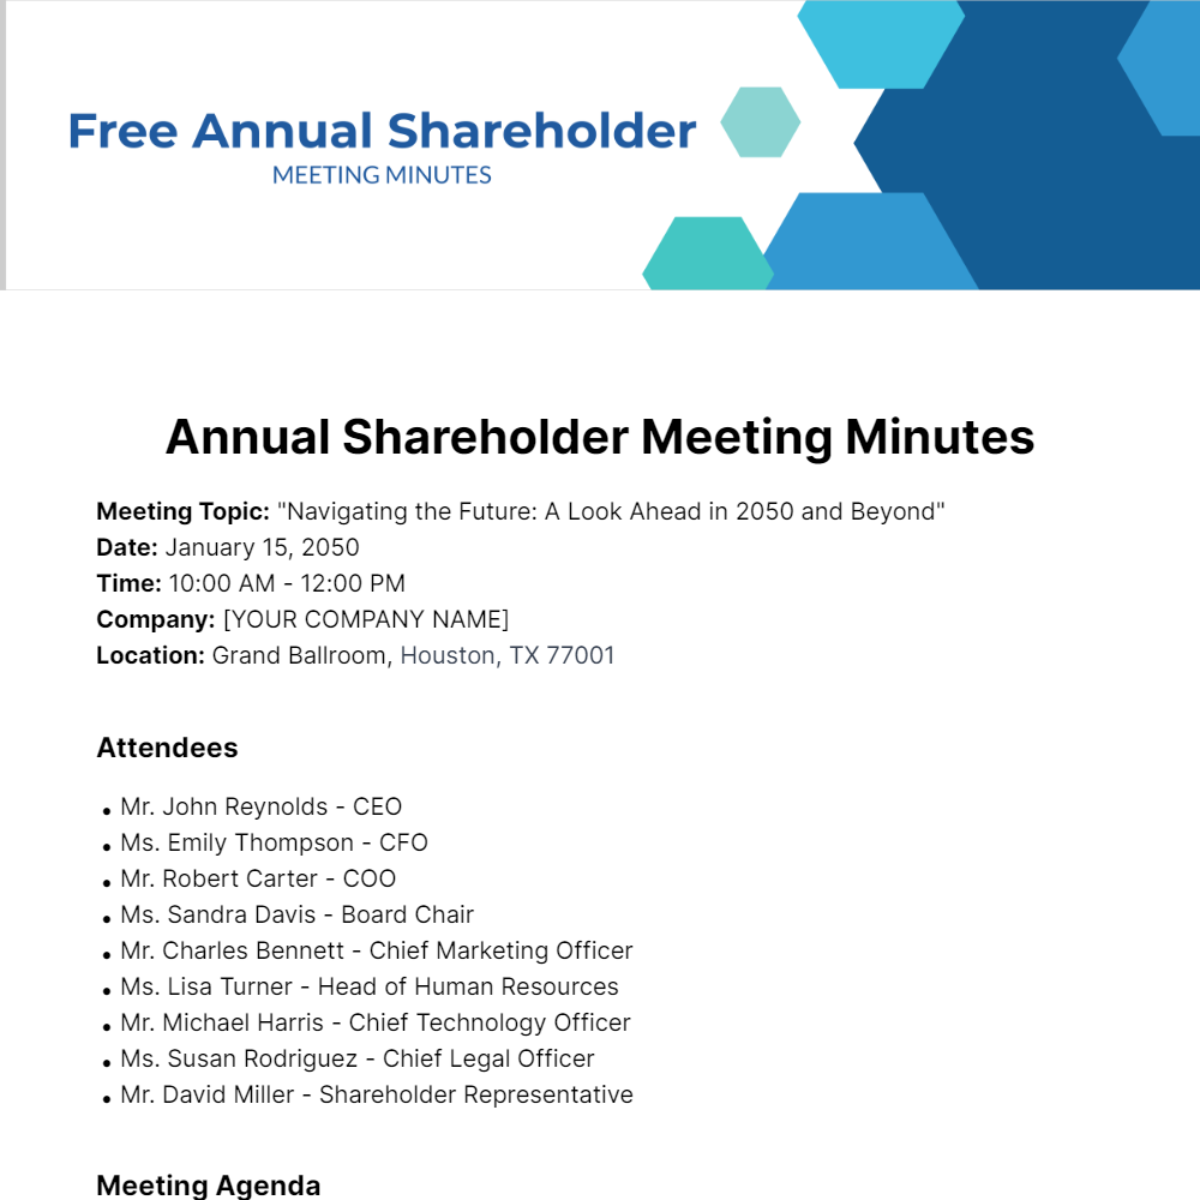 Annual Shareholder Meeting Minutes Template